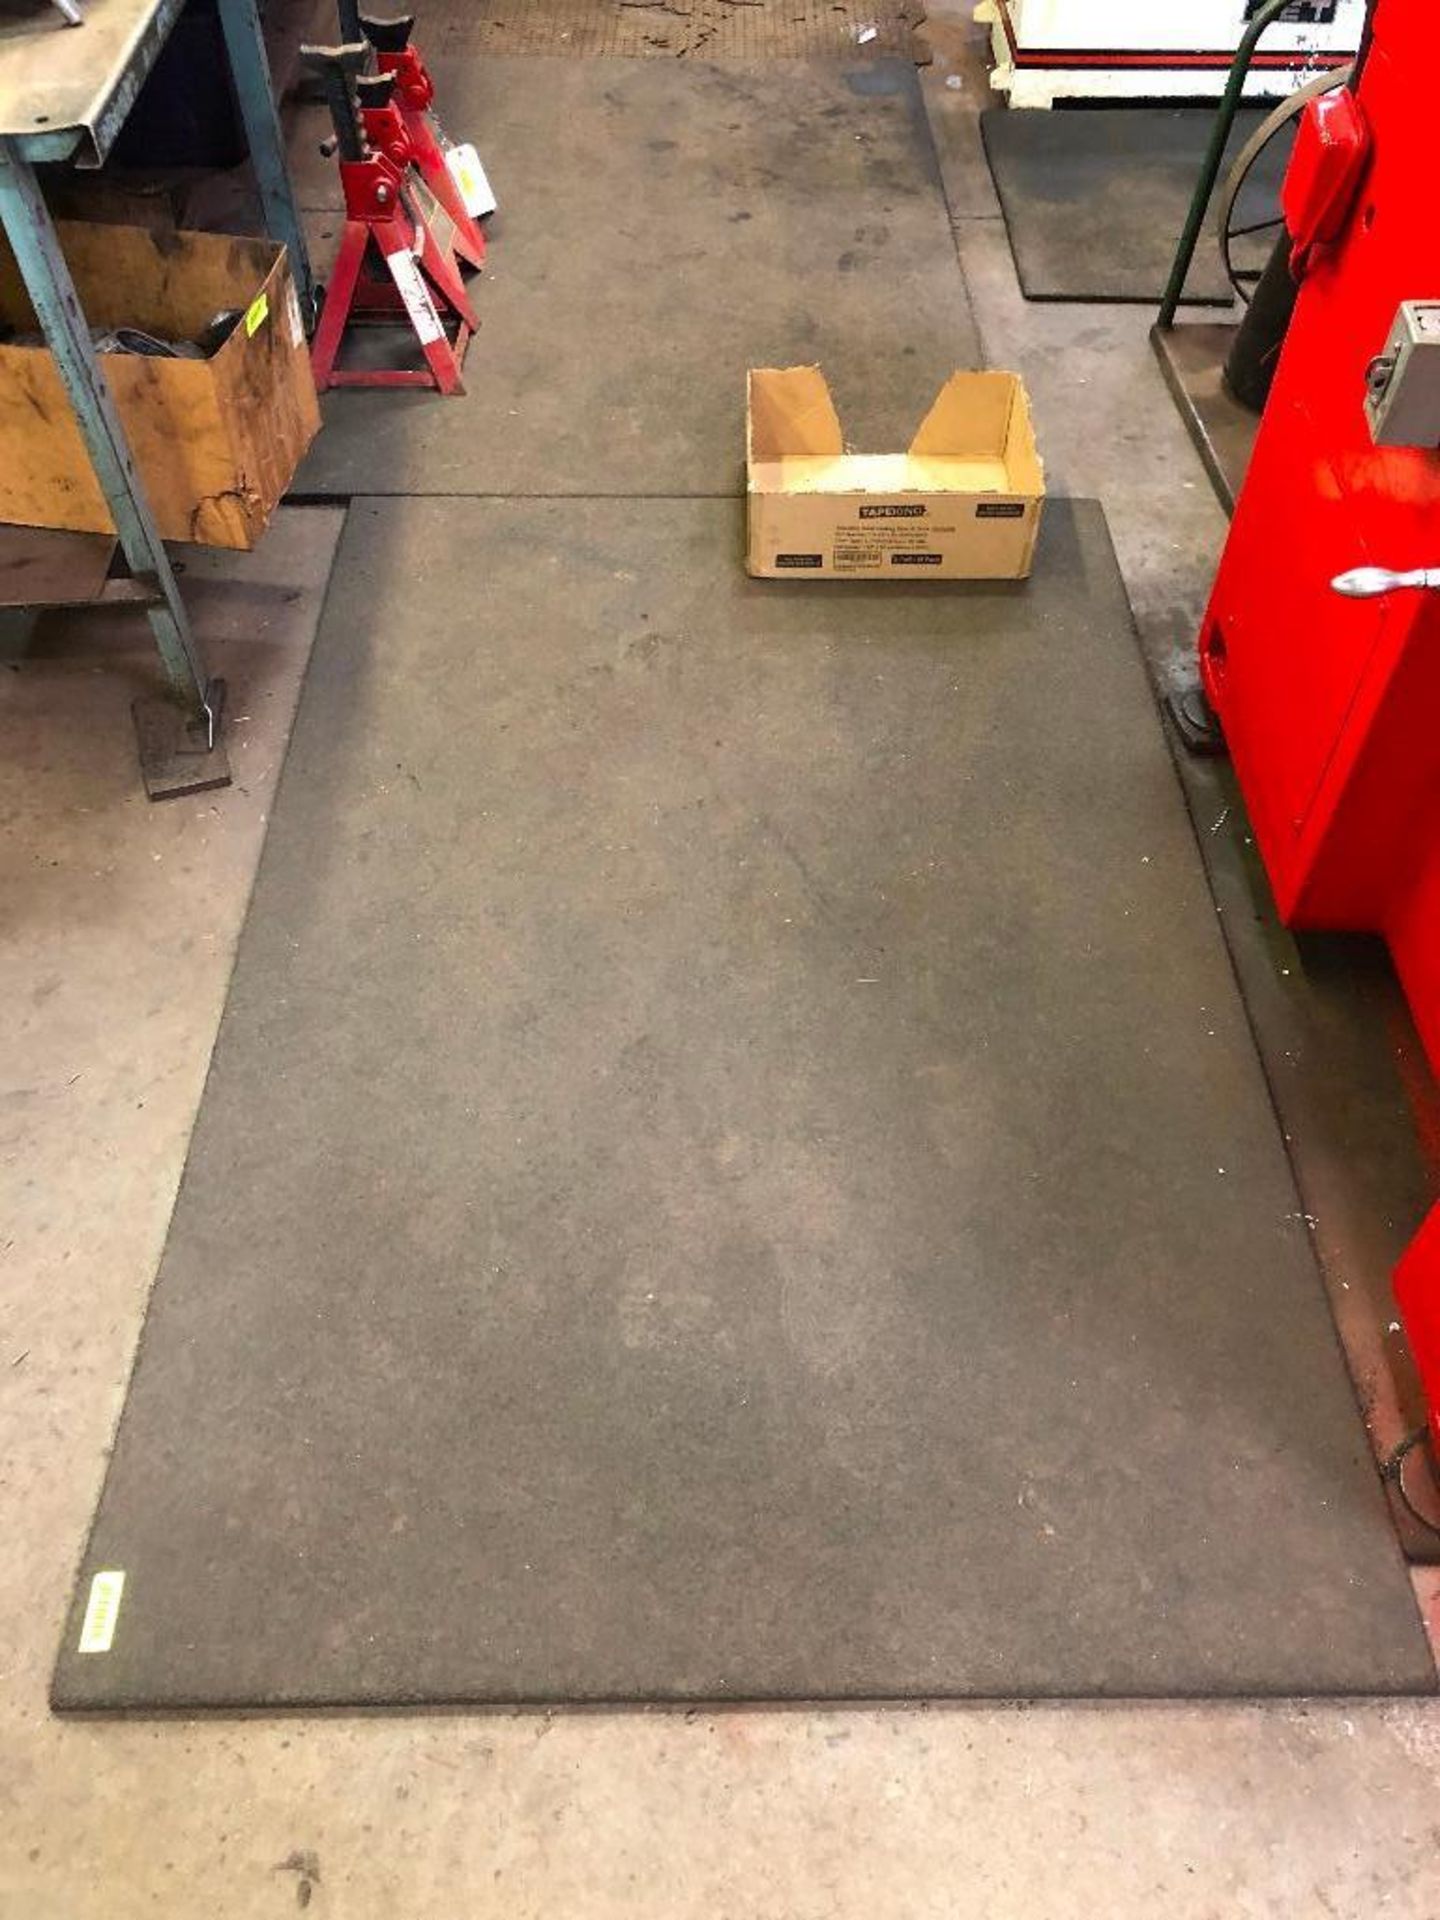 DESCRIPTION: ALL OF THE RUBBER TRAFFIC MATS IN THE WAREHOUSE. APPROX. 12 LOCATION: WAREHOUSE THIS LO